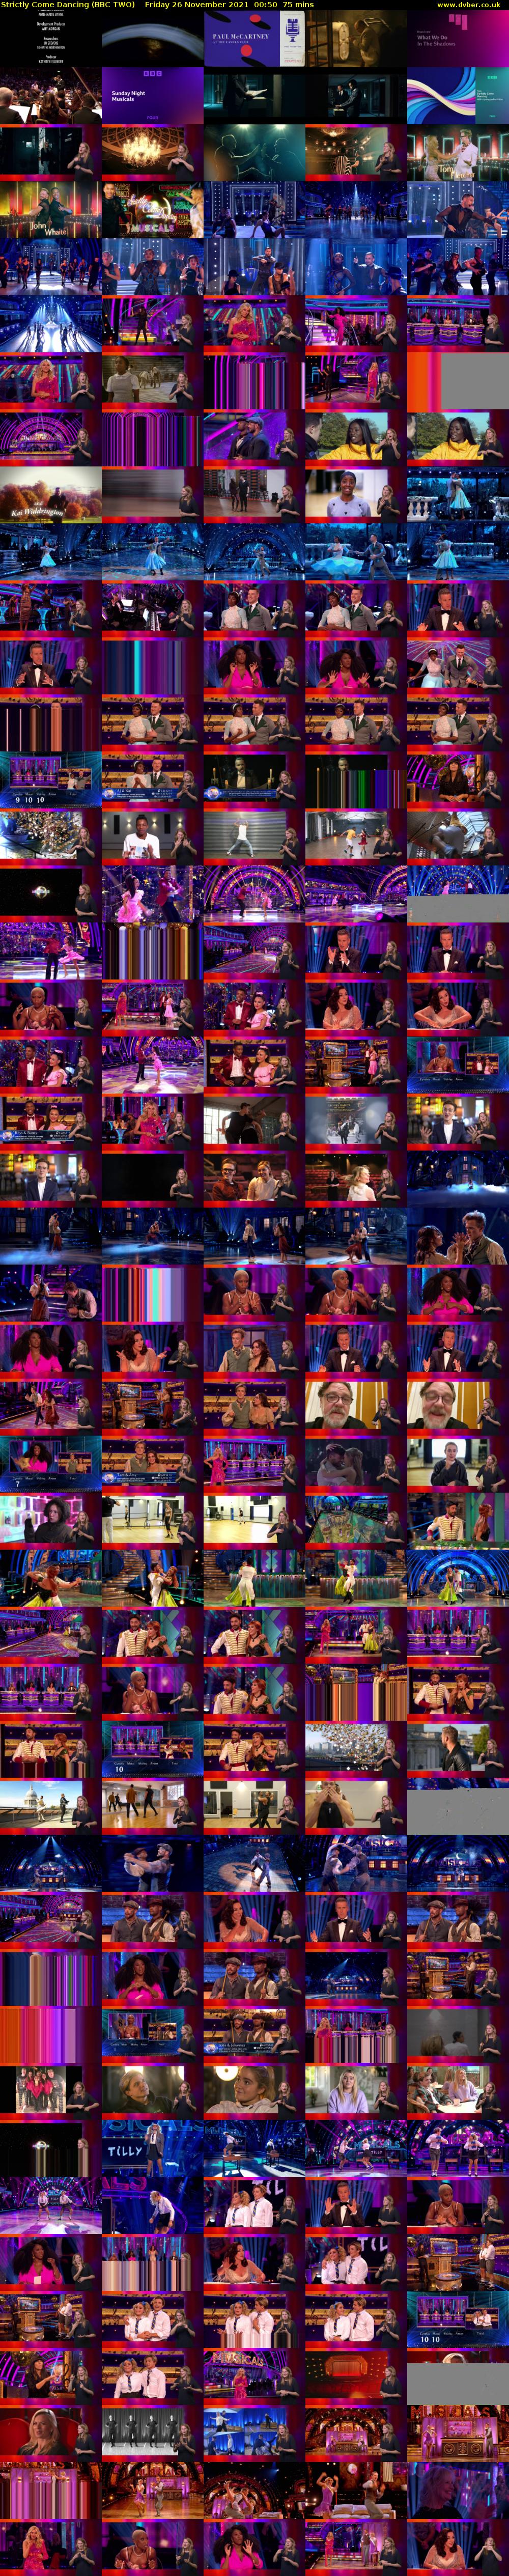 Strictly Come Dancing (BBC TWO) Friday 26 November 2021 00:50 - 02:05